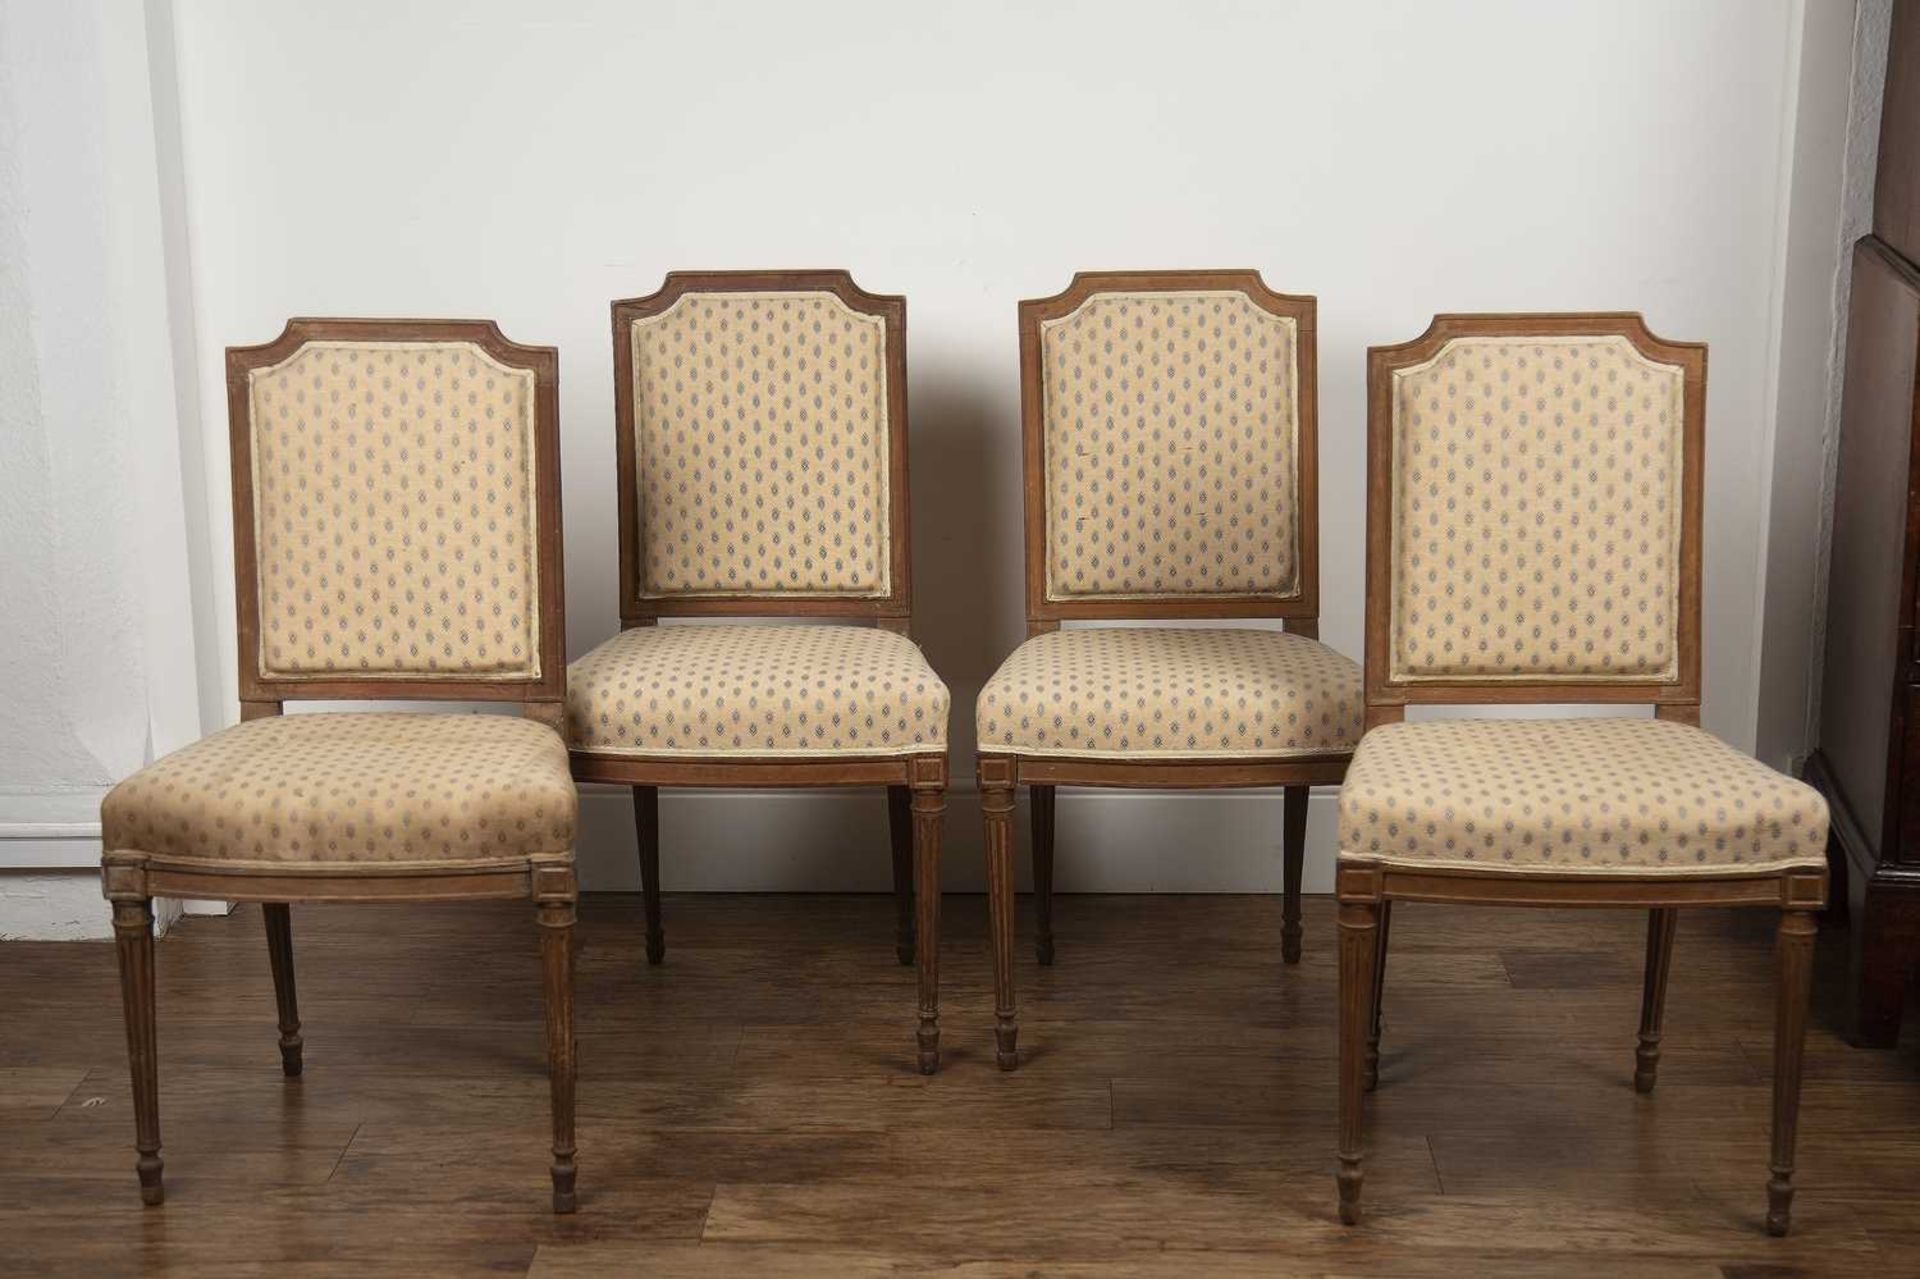 Set of four French Louis XVI style chairs with cream and blue upholstery on reeded legs, 90.5cm high